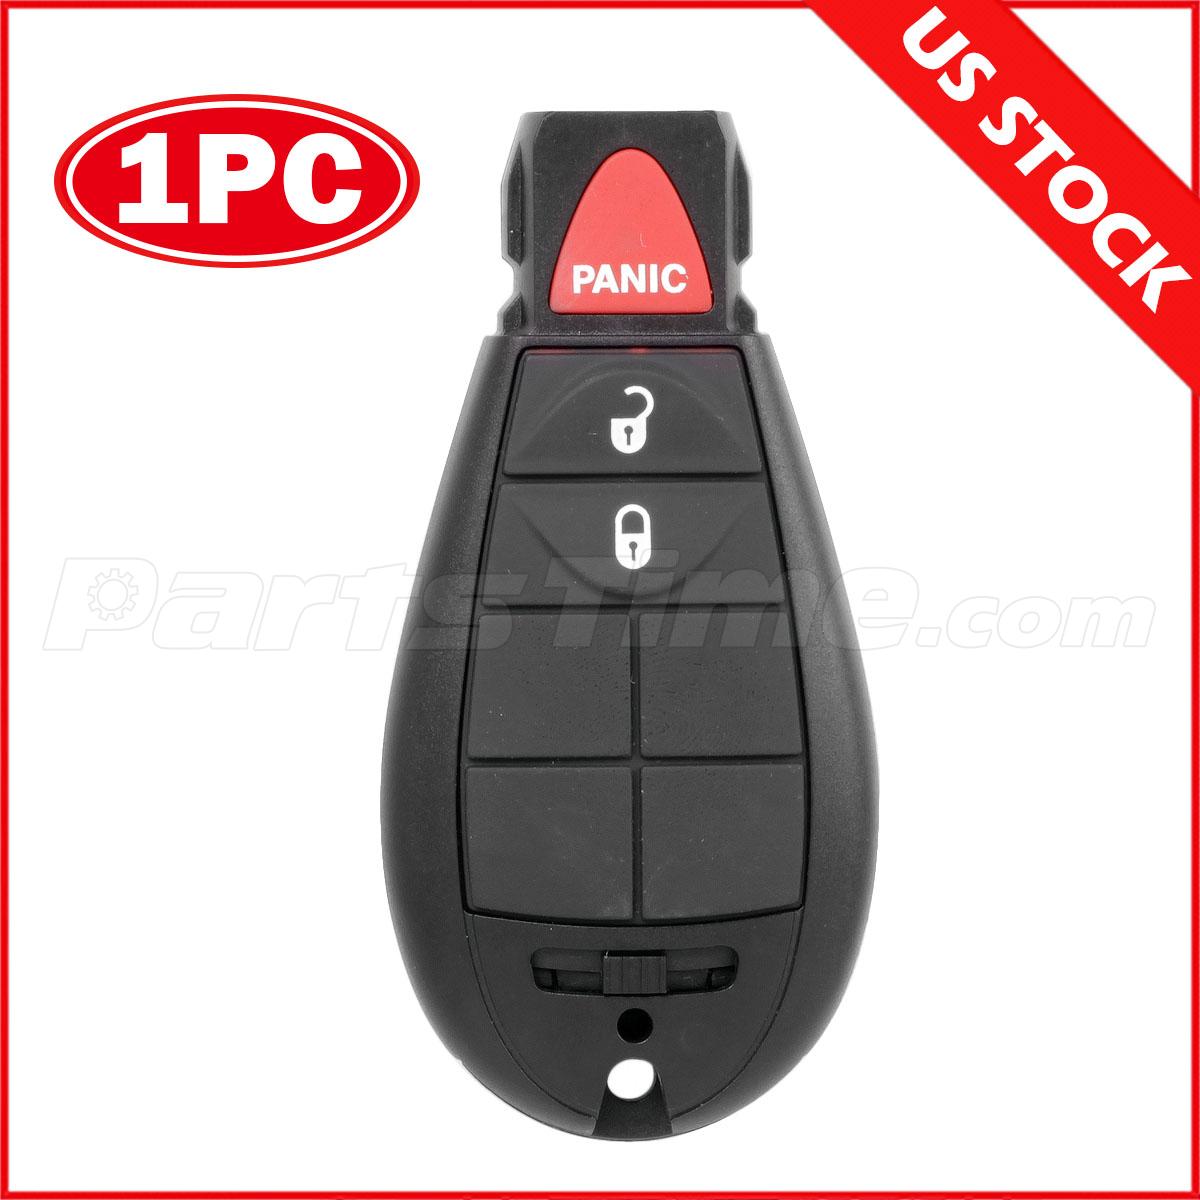 2003 Chrysler town and country program remote